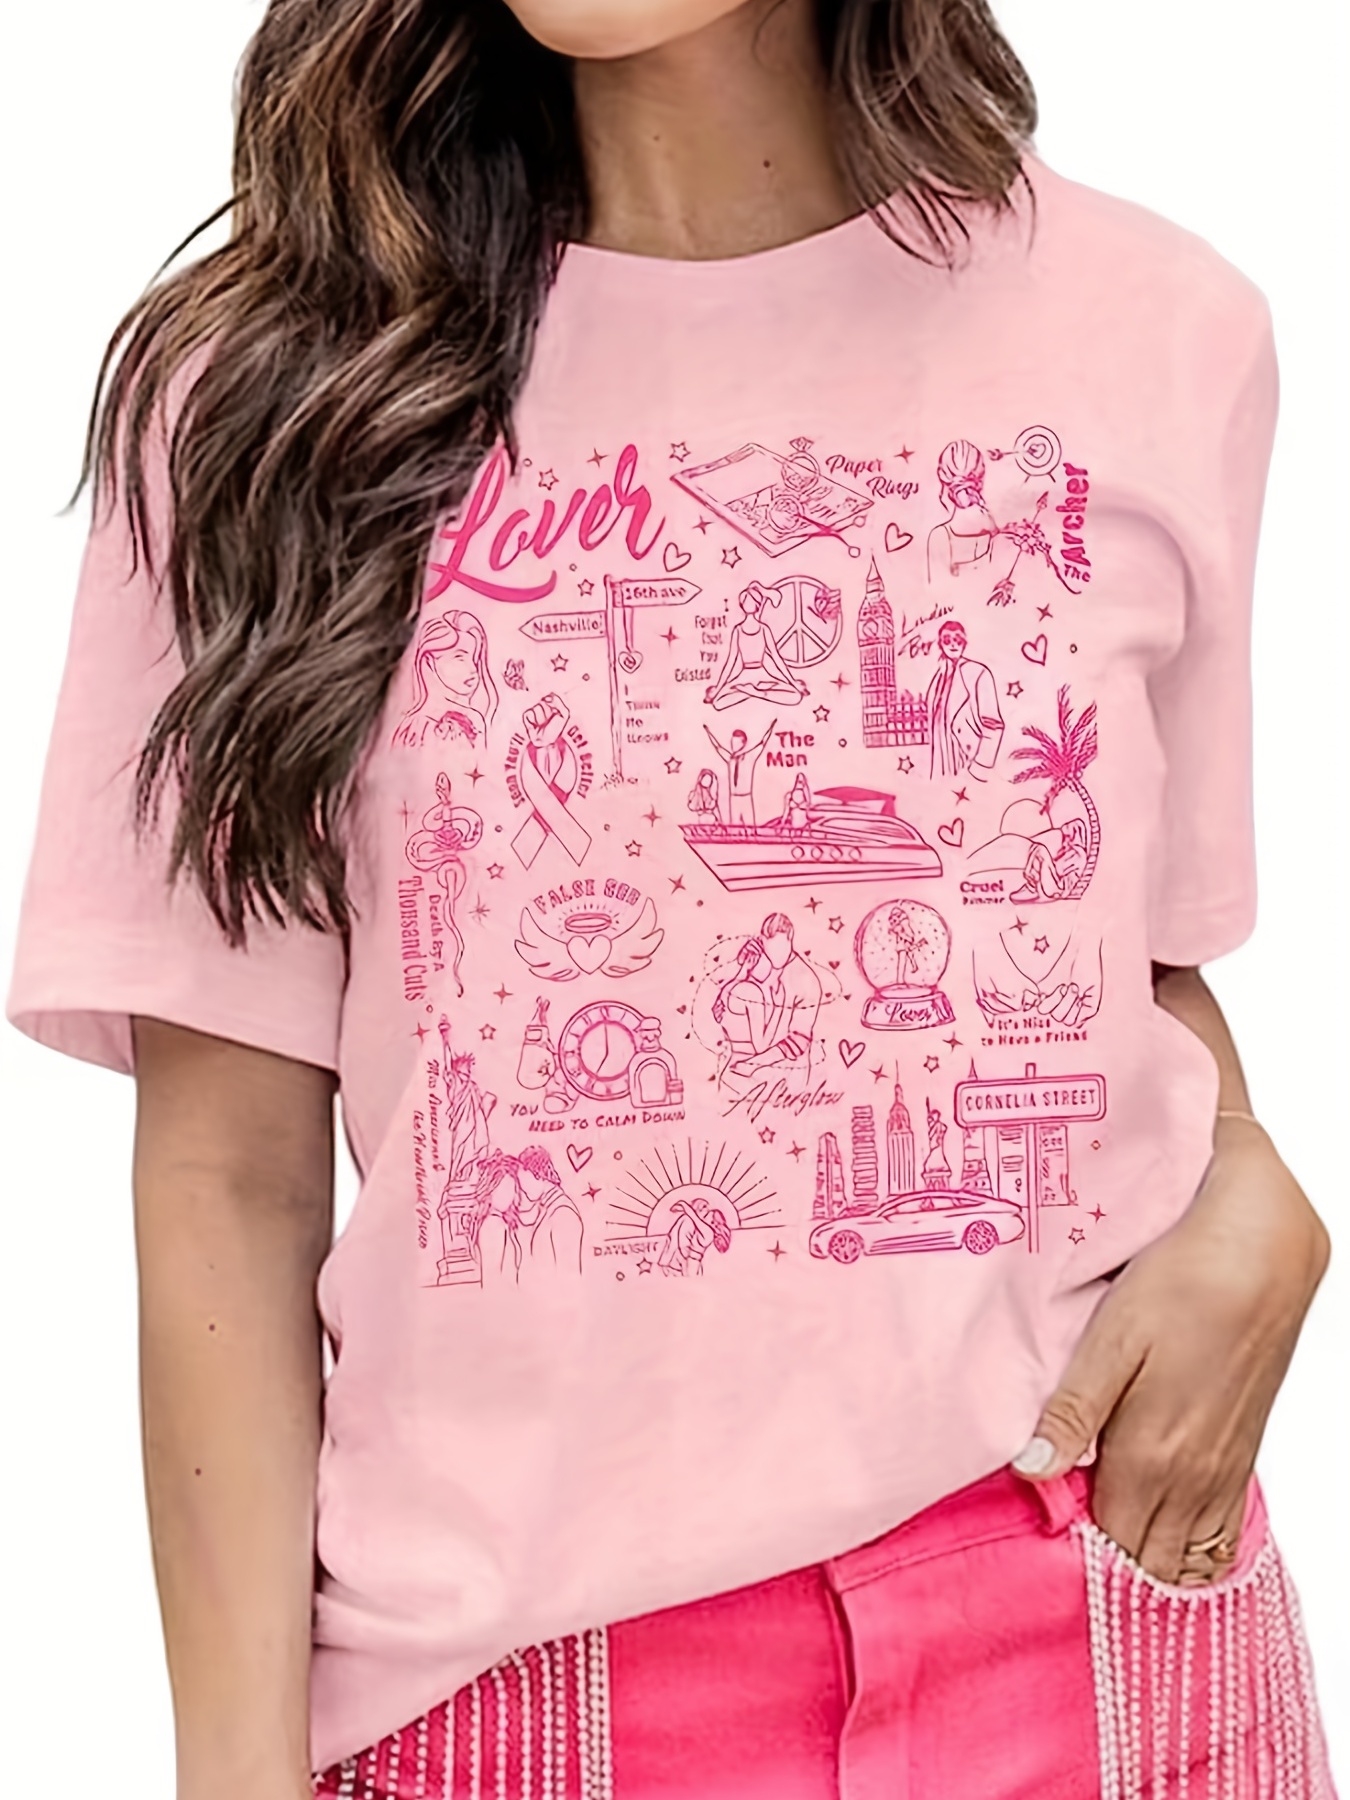 Cathalem Cotton Tshirts for Women Printed T-Shirts Short Sleeve Graphic Tee  Tops,Pink+Blue S